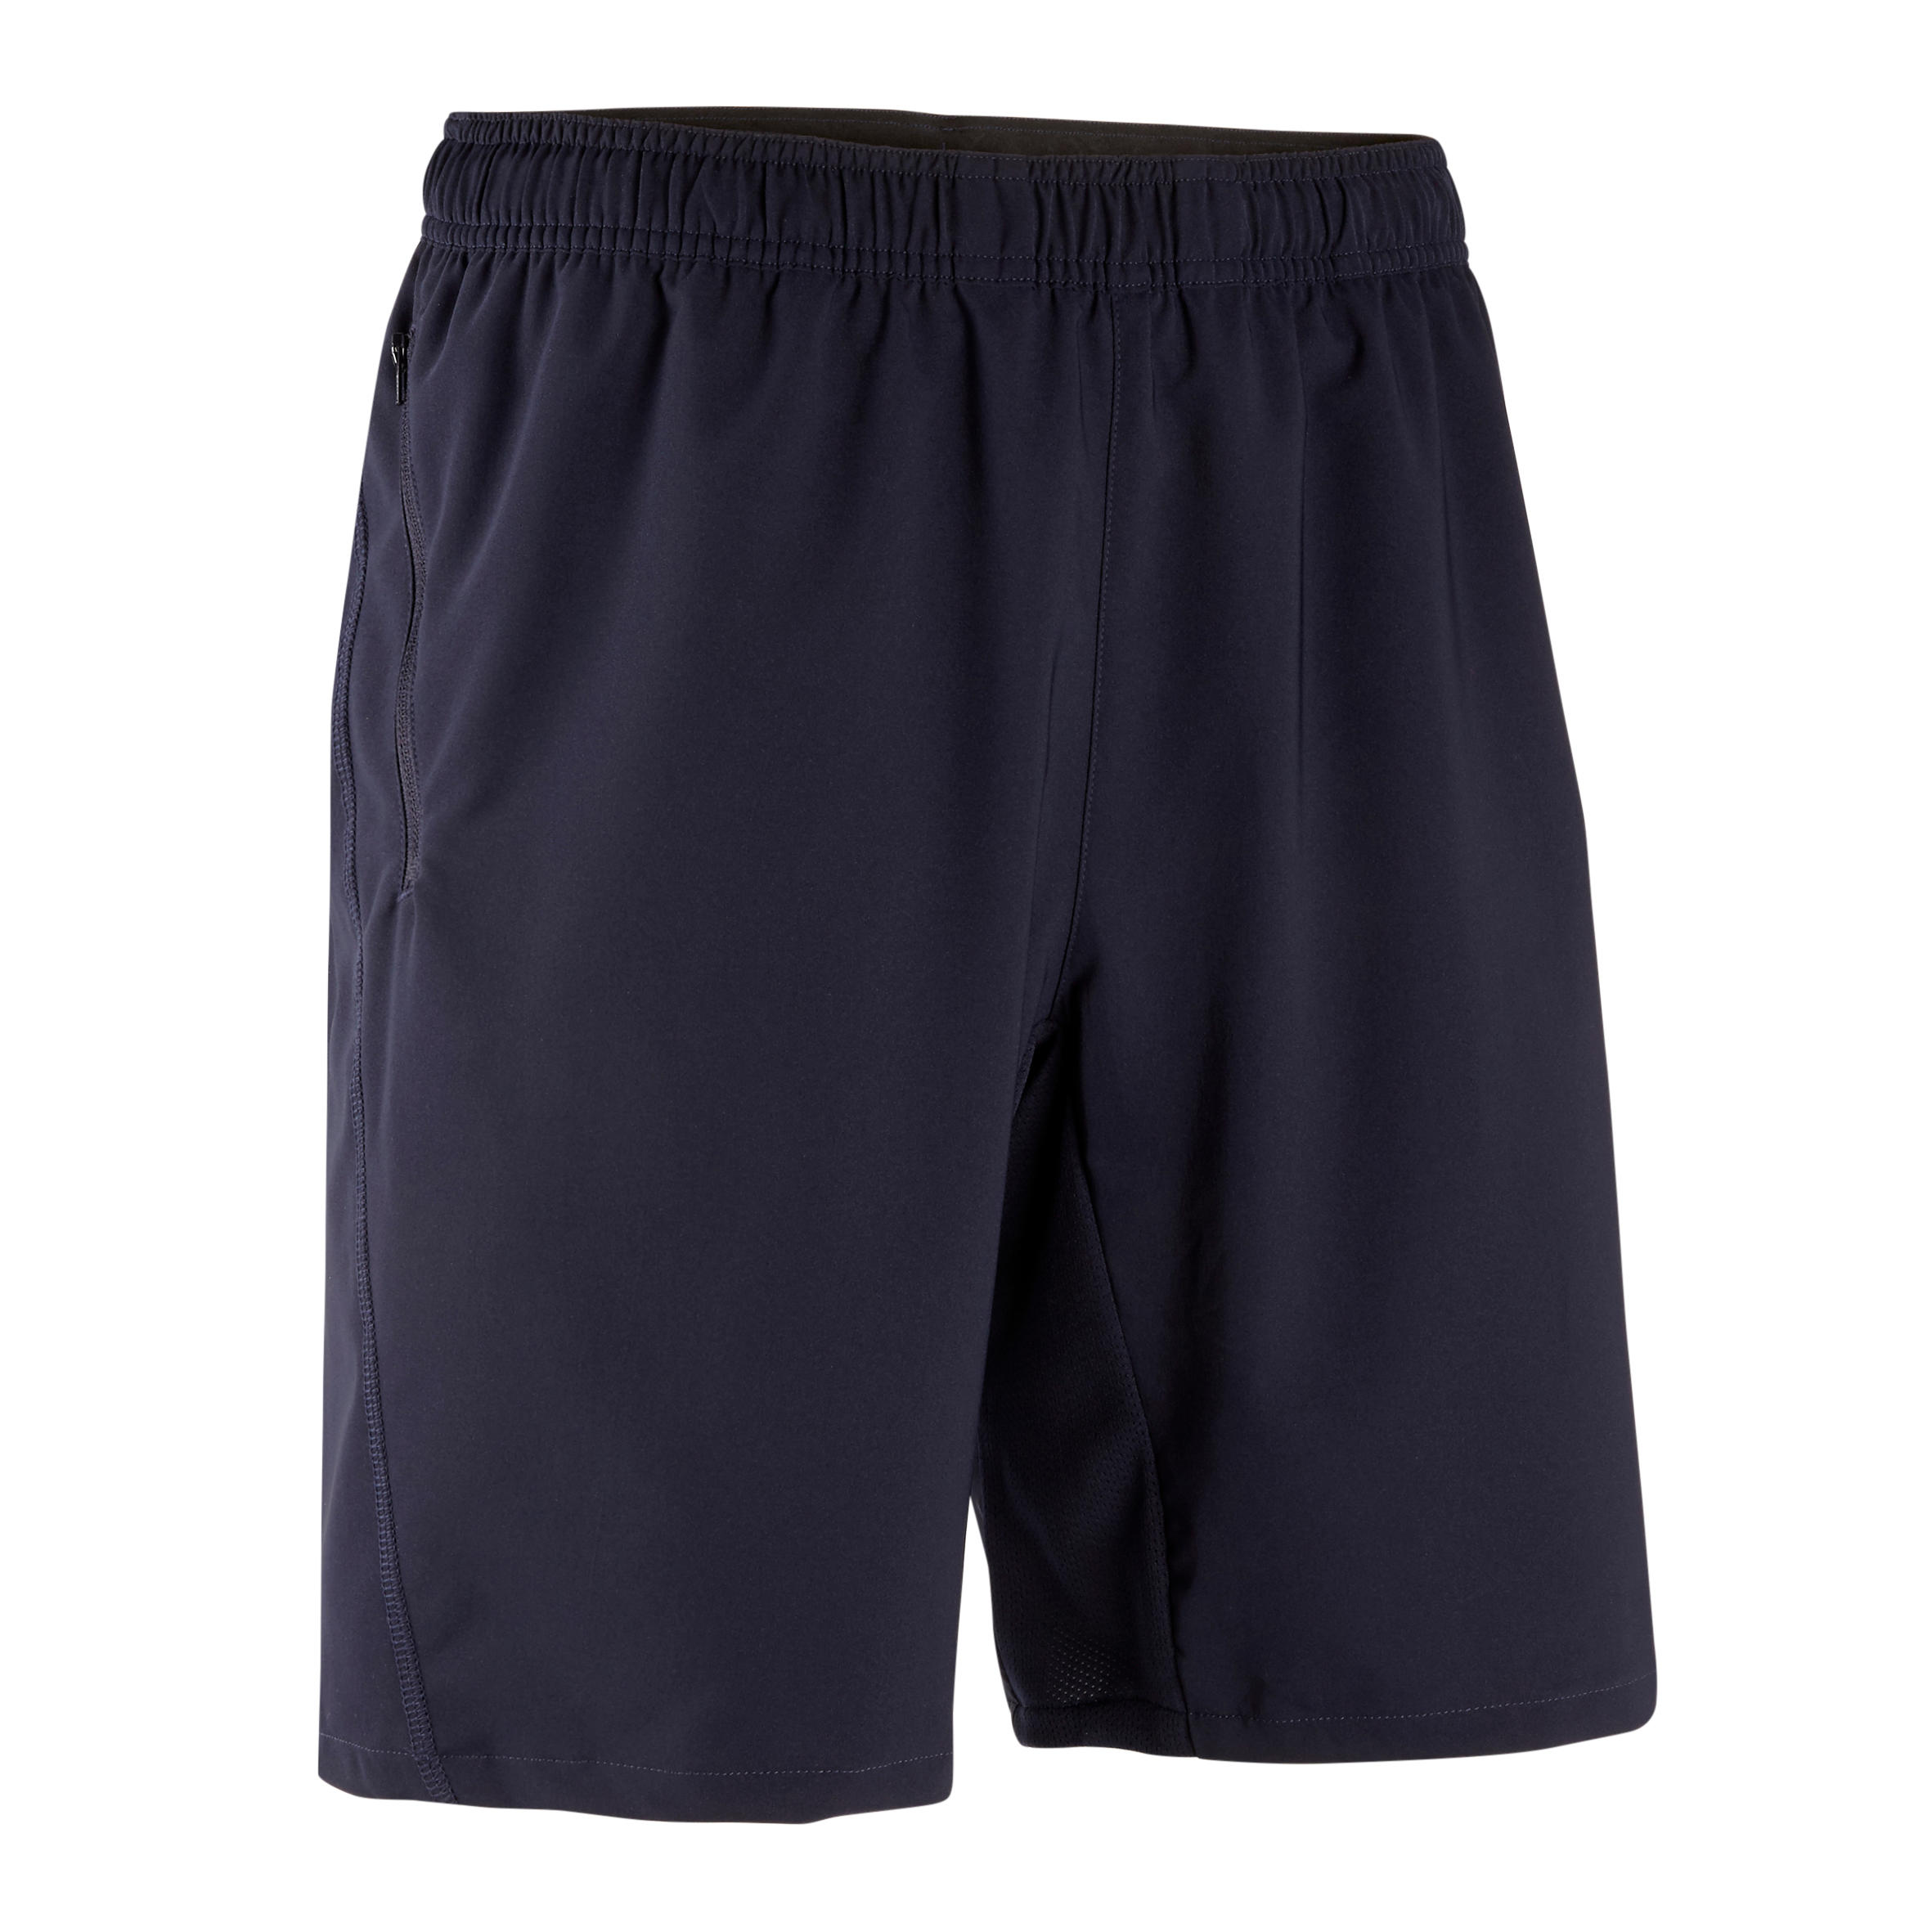 Buy Gym Shorts For Women Online At Upto 50 Off From PUMA